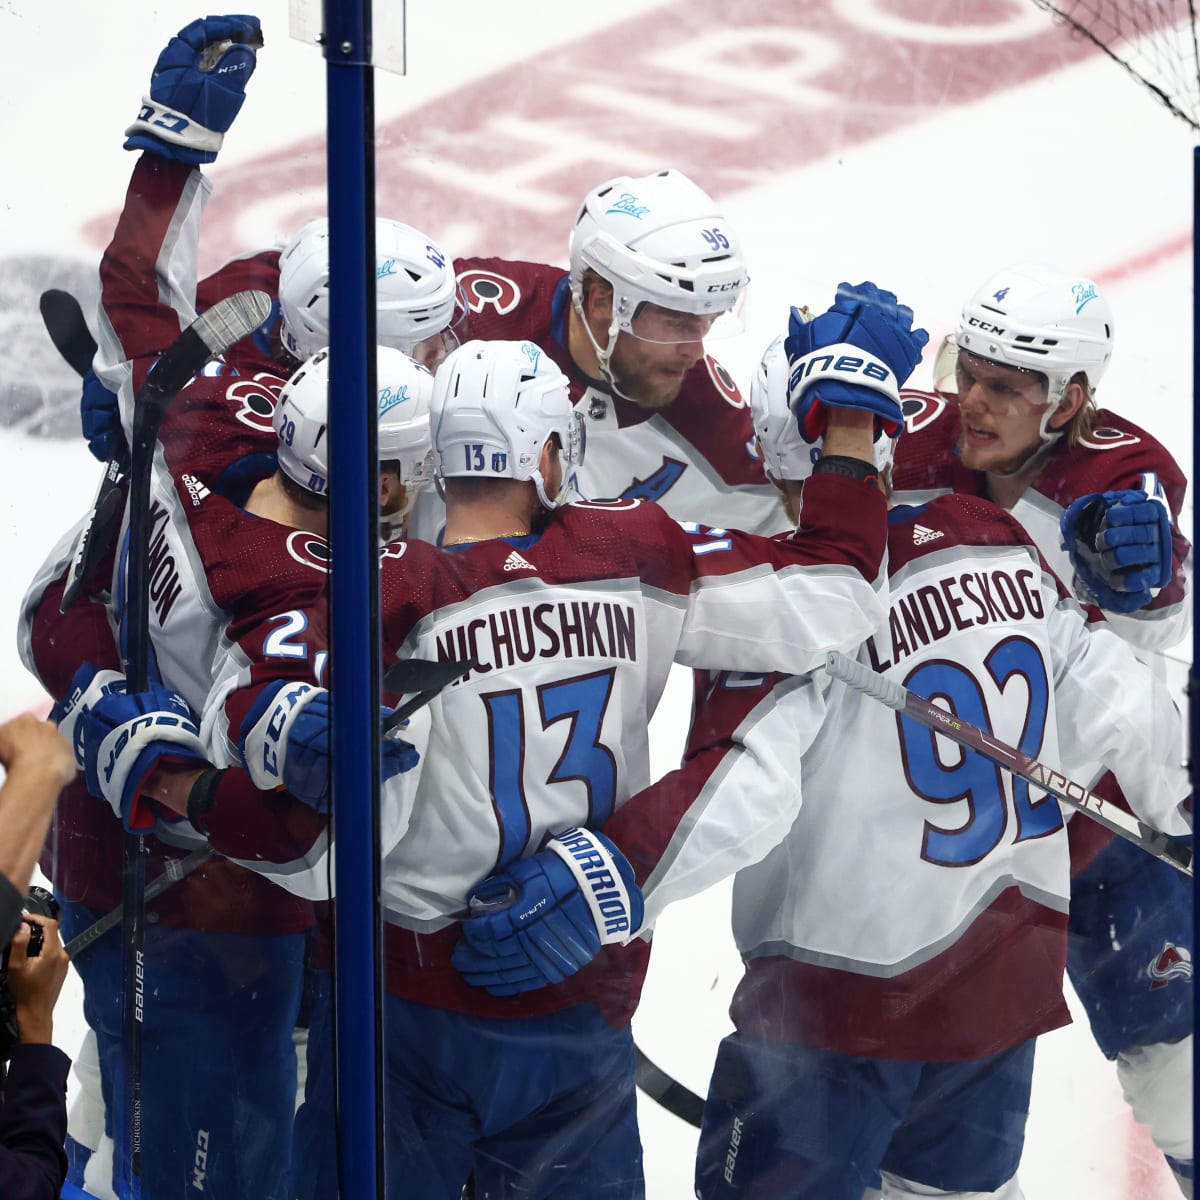 Out to dry': NHL champion Lightning in 2-0 hole to Avs